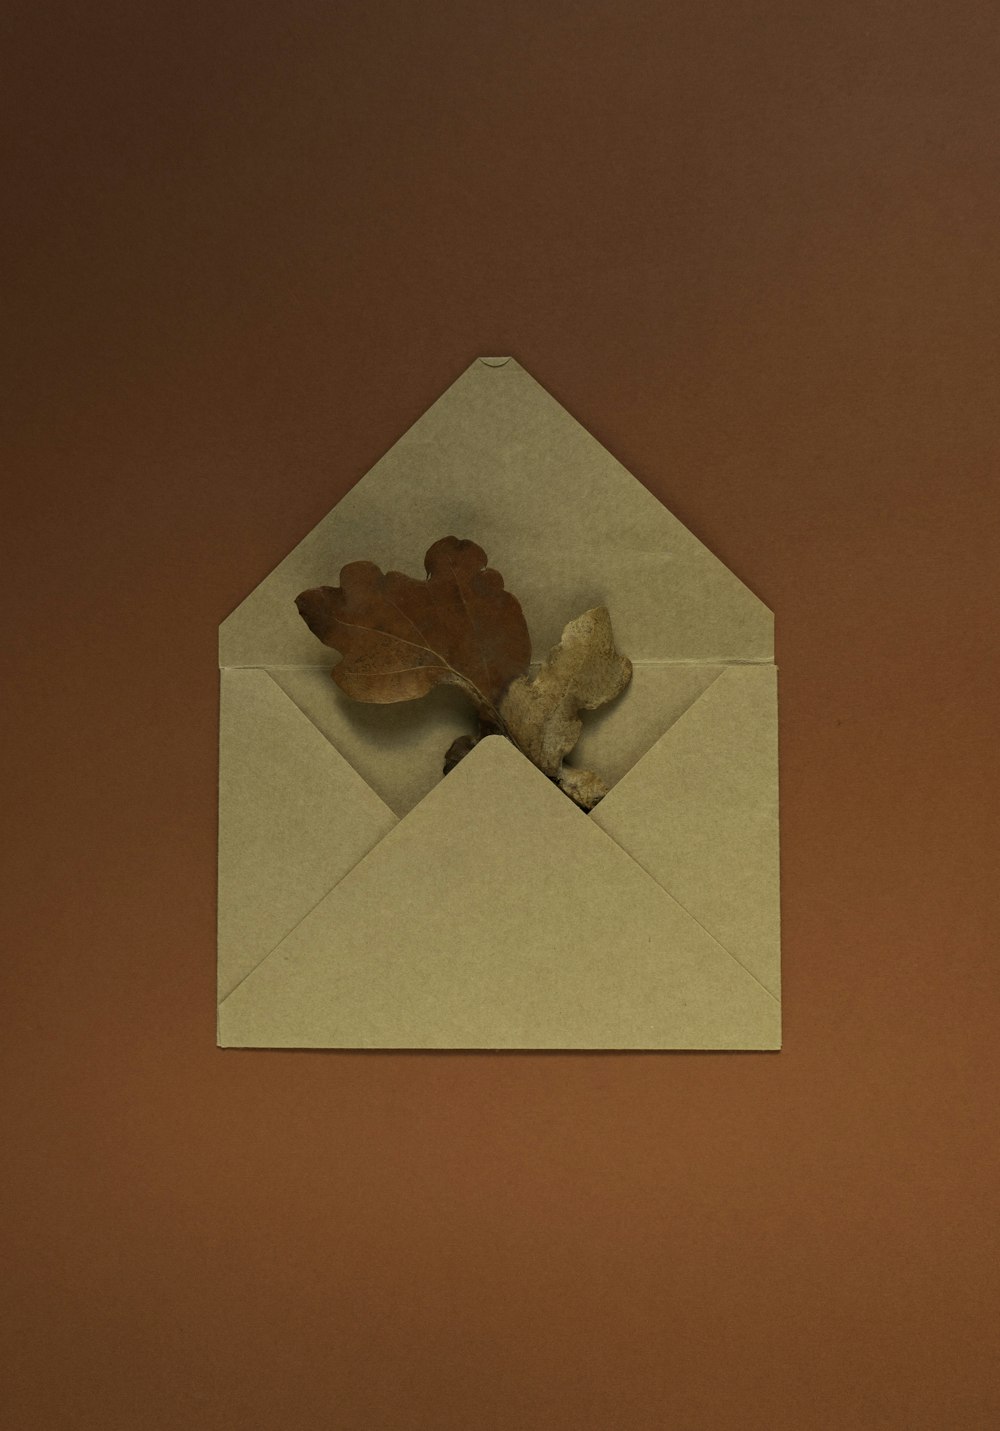 an envelope with a leaf sticking out of it